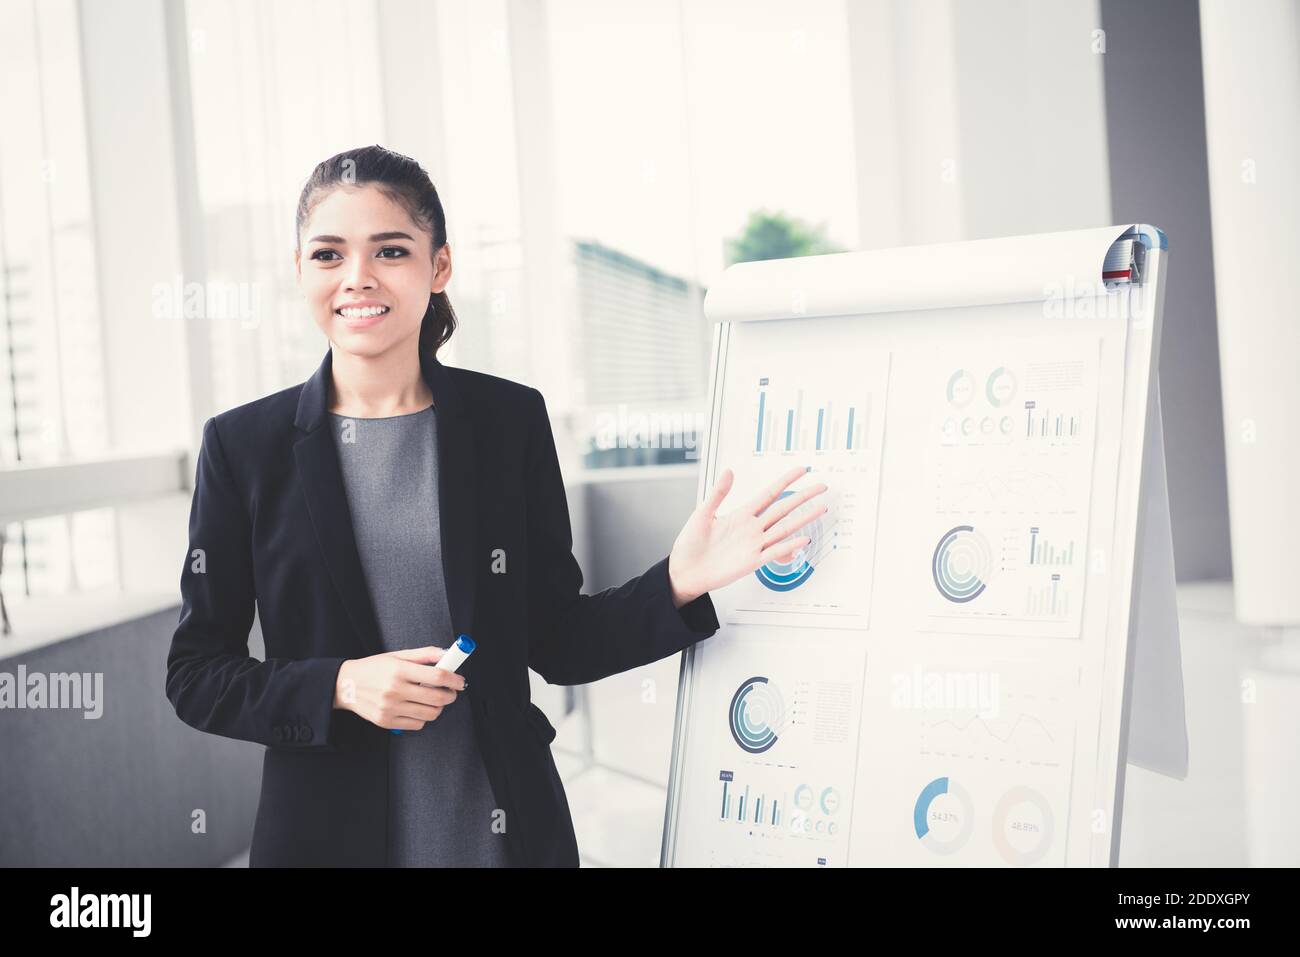 Young businesswoman presenting her work with flip chart Stock Photo